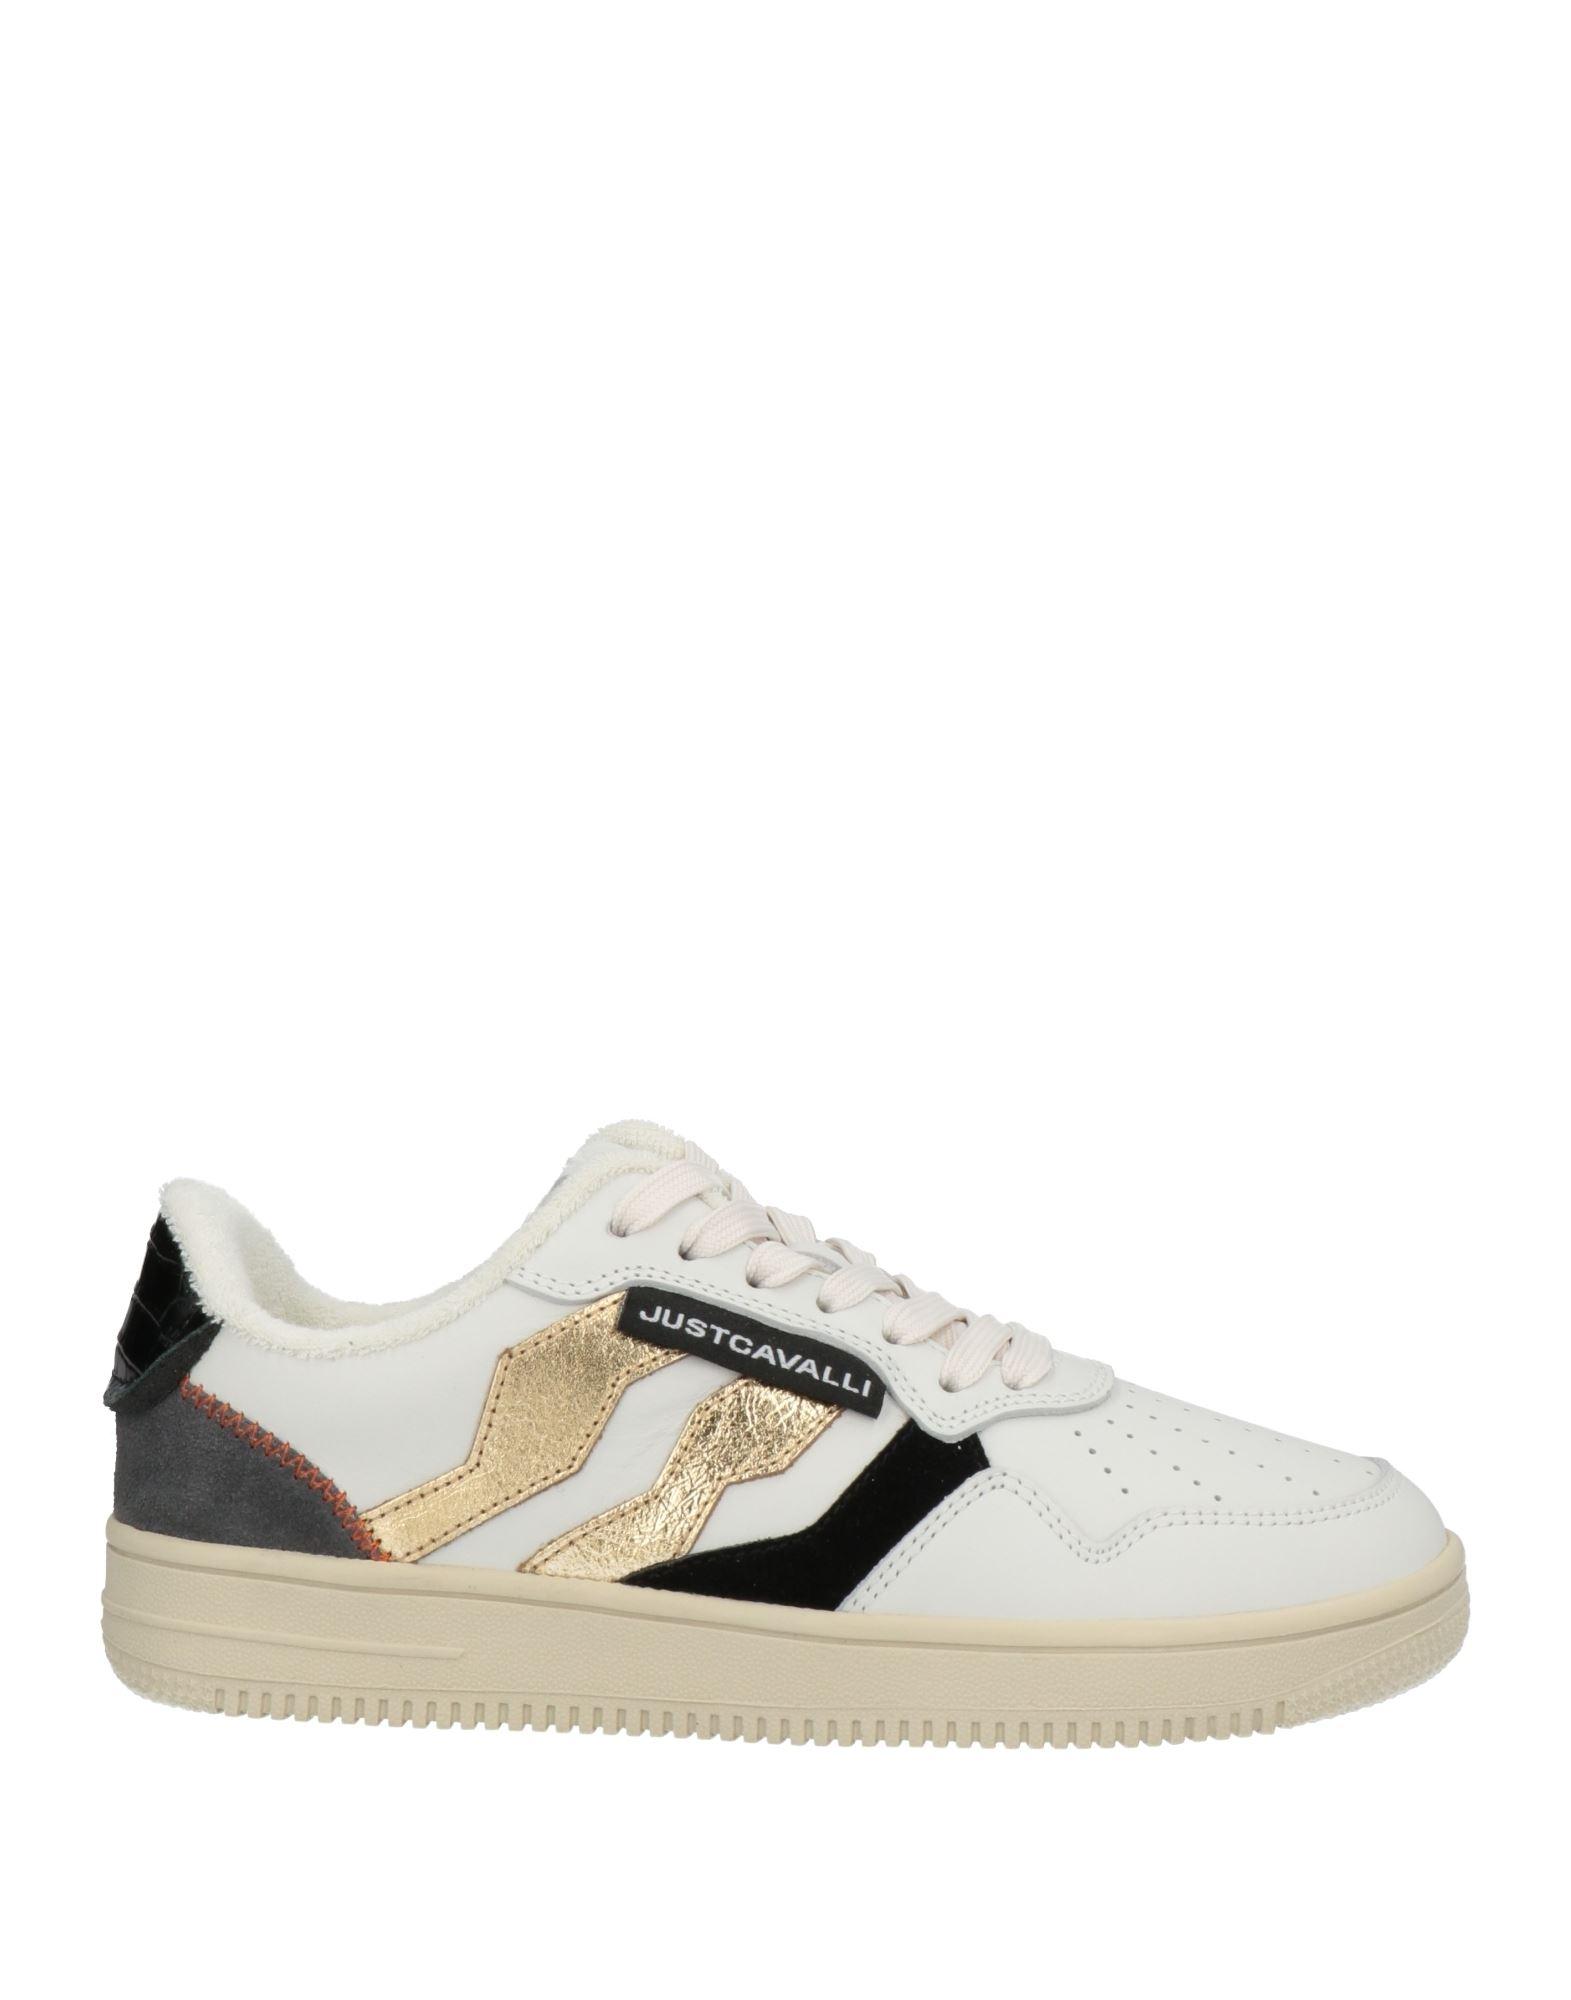 Just Cavalli Trainers in White | Lyst